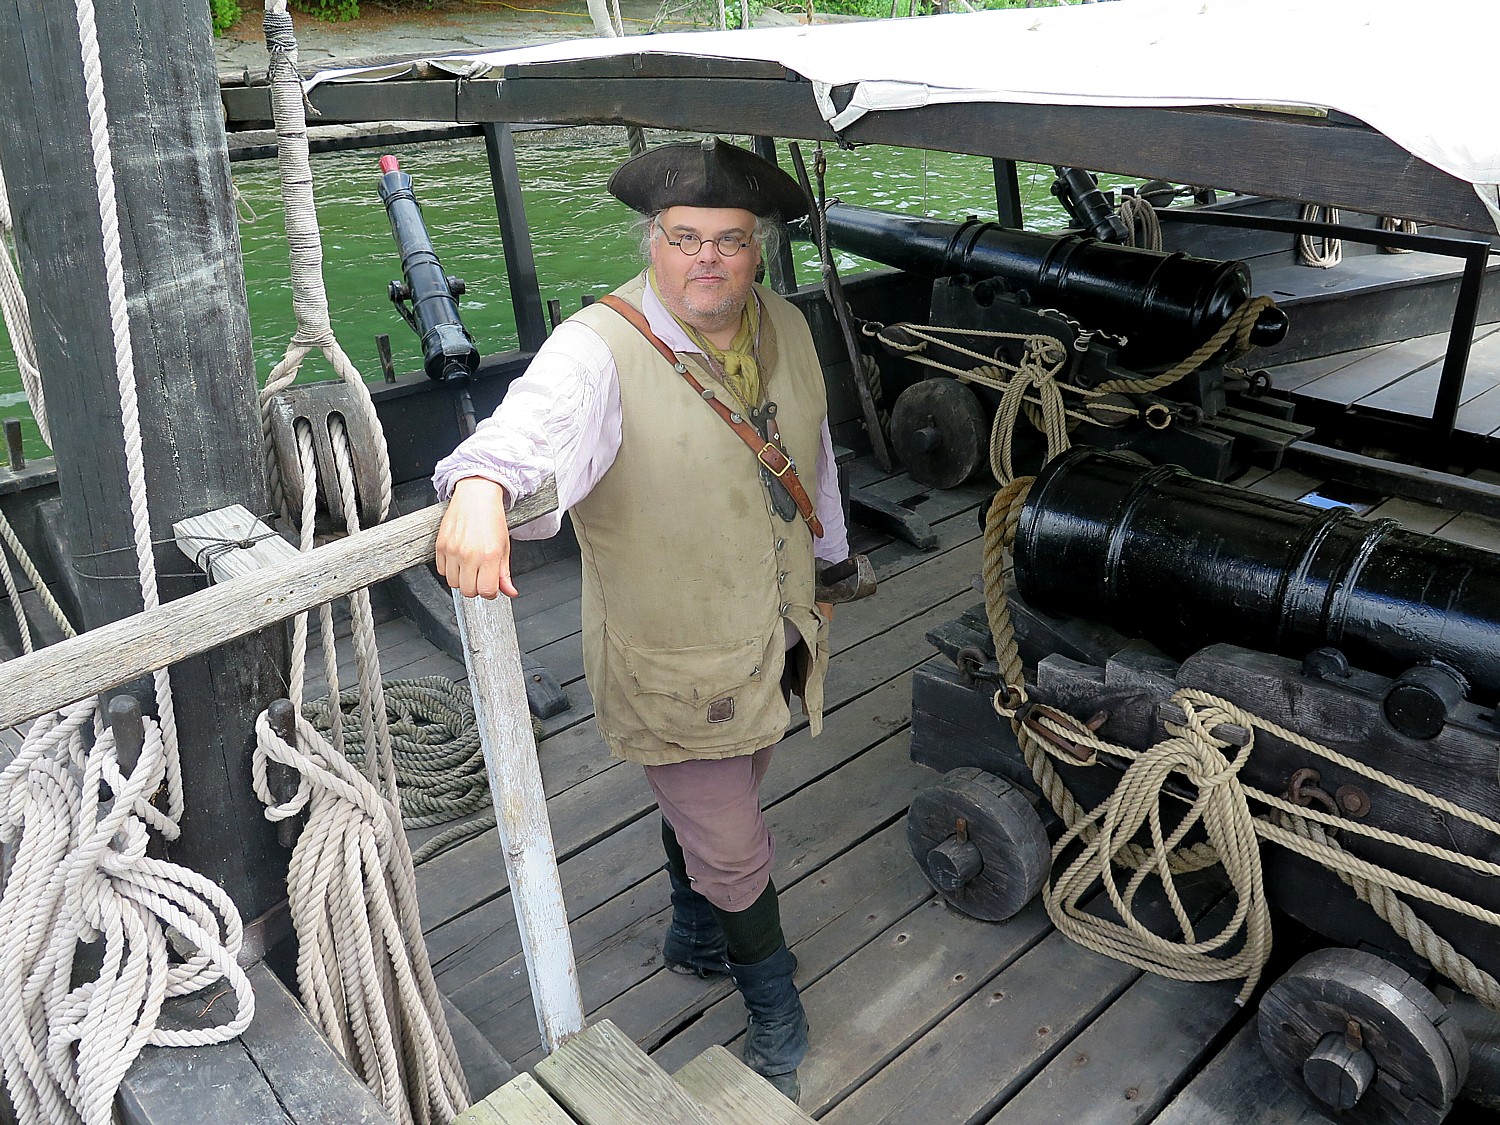 Come aboard the Philadelphia II, a replica of a Revolutionary War gunboat at the Lake Champlain Maritime Museum. Len Ruth portrays the first officer of the Philadelphia © 2016 Karen Rubin/news-photos-features.com